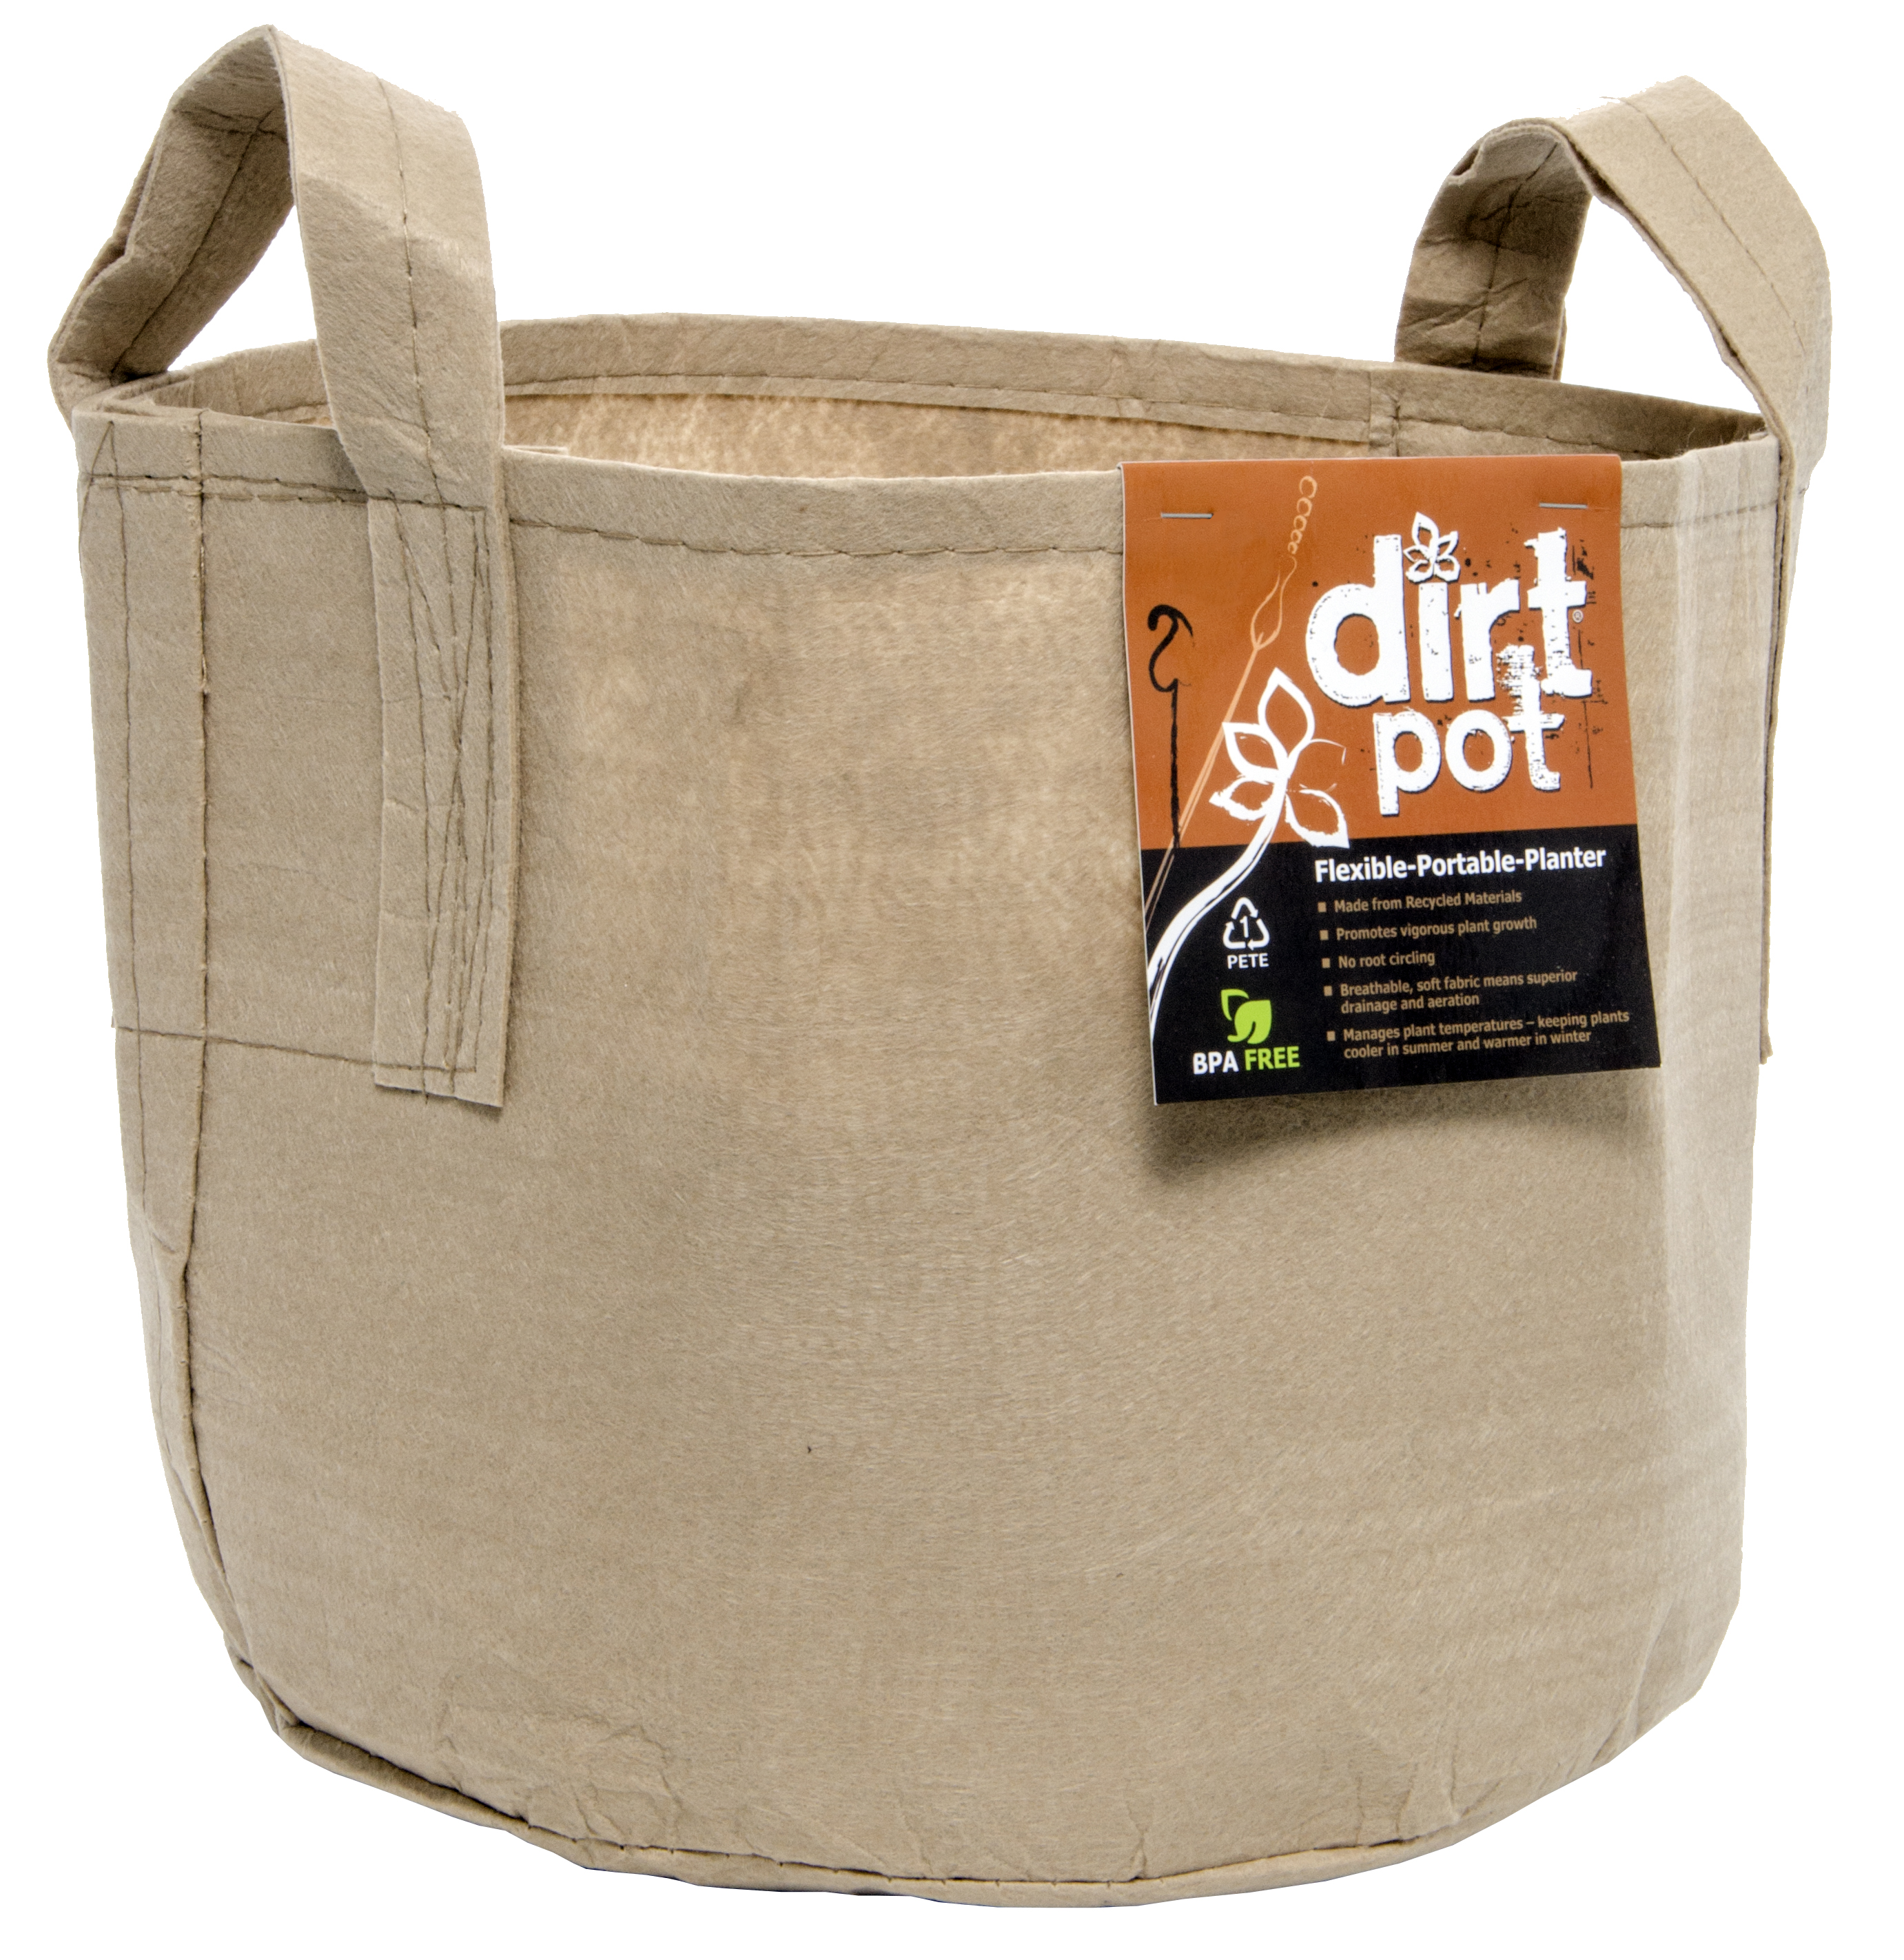 Picture for Dirt Pot Flexible Portable Planter, Tan, 300 gal, with handles